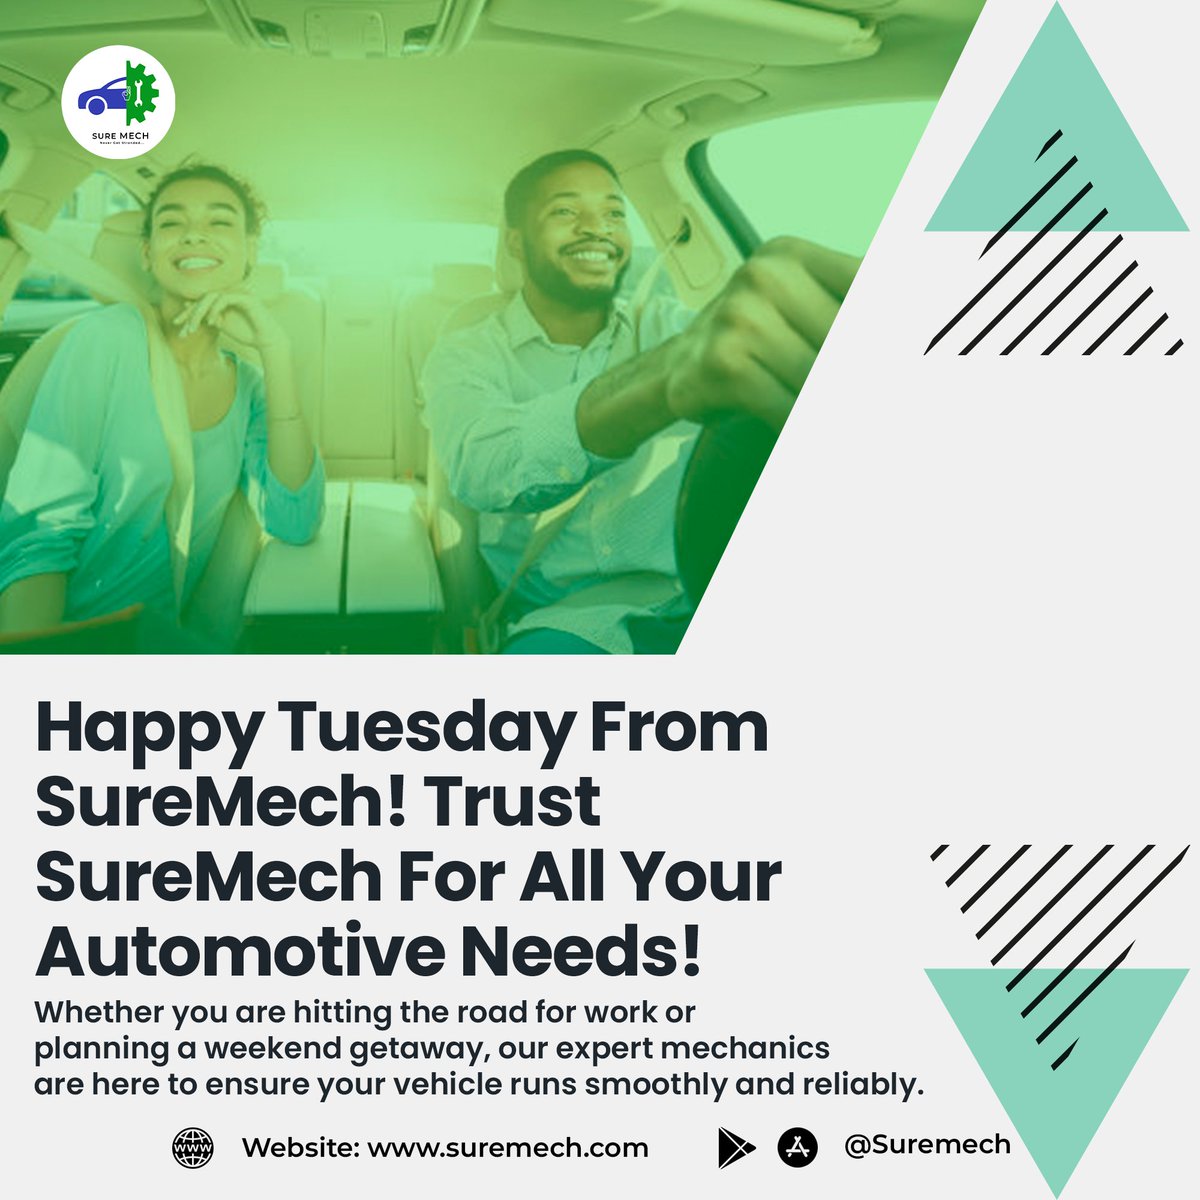 Happy Tuesday from SureMech! 🚗✨ Whether you're hitting the road for work or planning a weekend getaway, our expert mechanics are here to ensure your vehicle runs smoothly and reliably. Trust SureMech for all your automotive needs and experience top-notch service every time.